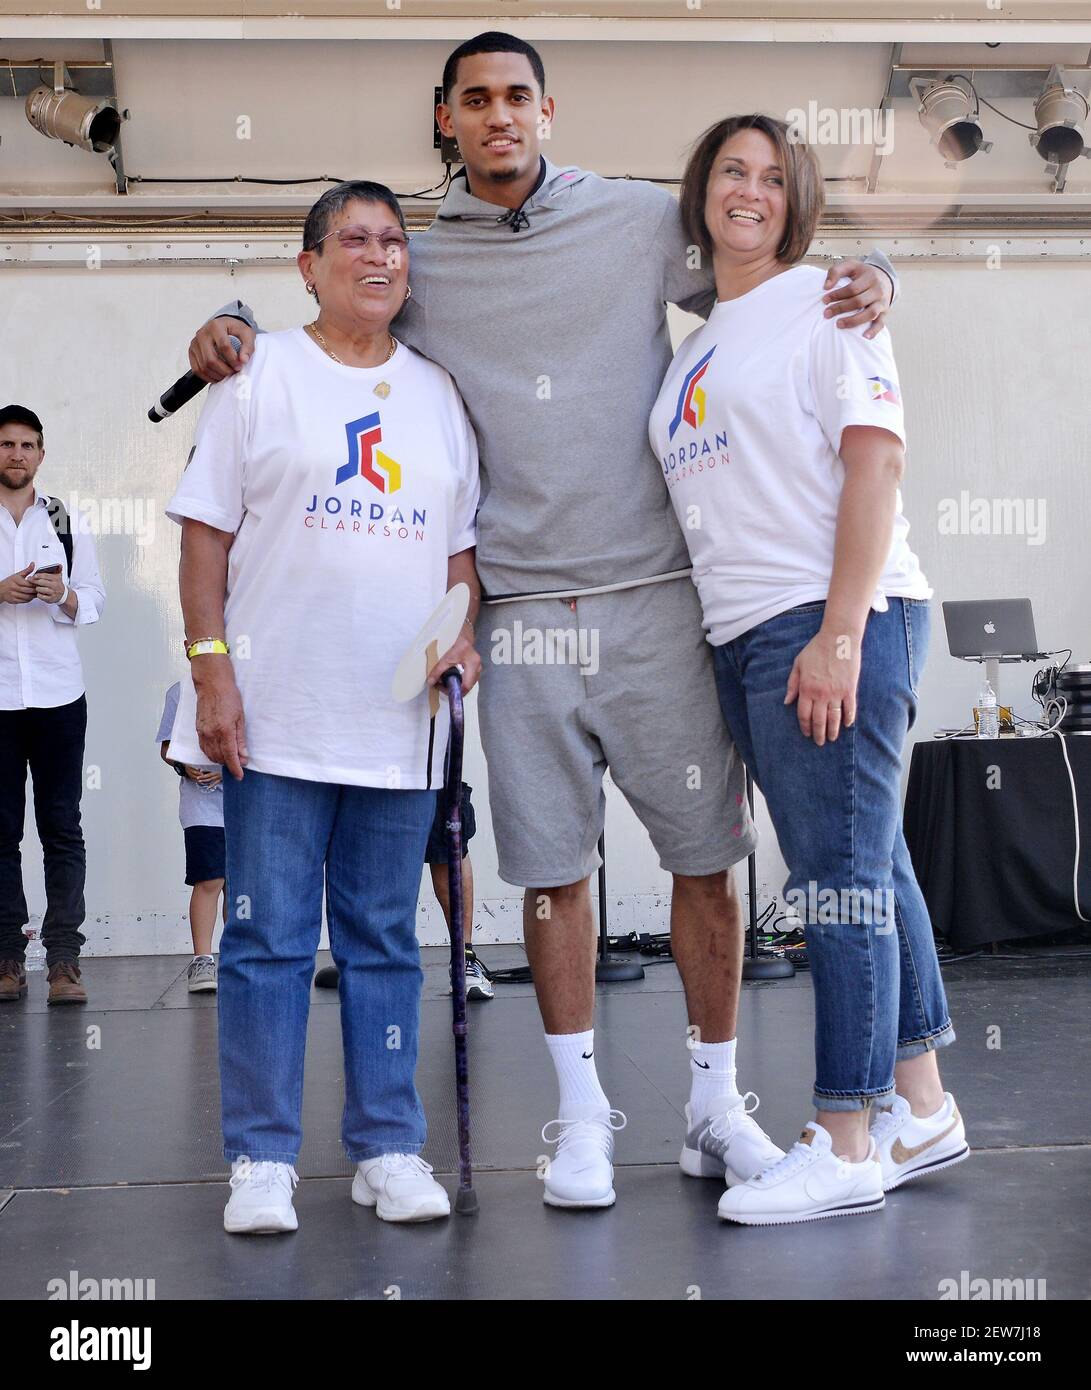 Jordan Clarkson of the LA Lakers with his Grandmother and Mother at the  26th Festival of Philippine Arts and Culture (FPAC26) held at Echo Park  Lake in Los Angeles, CA on Saturday,